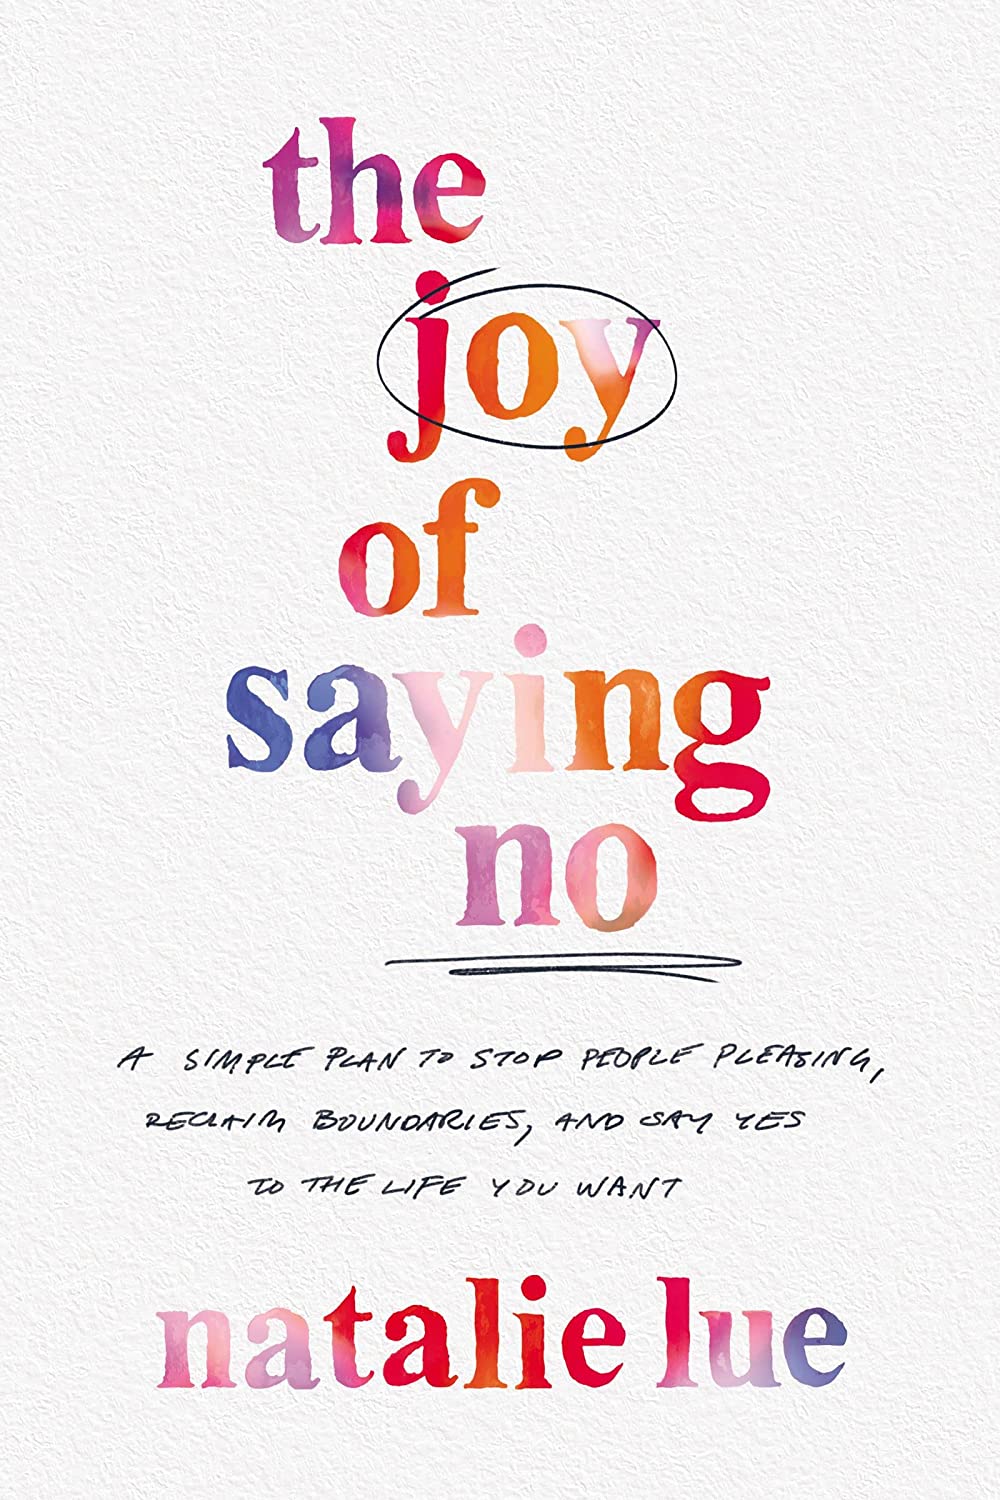 The Joy of Saying No by Natalie Lue book cover. Subtitle: A simple plan to stop people pleasing, reclaim boundaries, and say yes to the life you want.